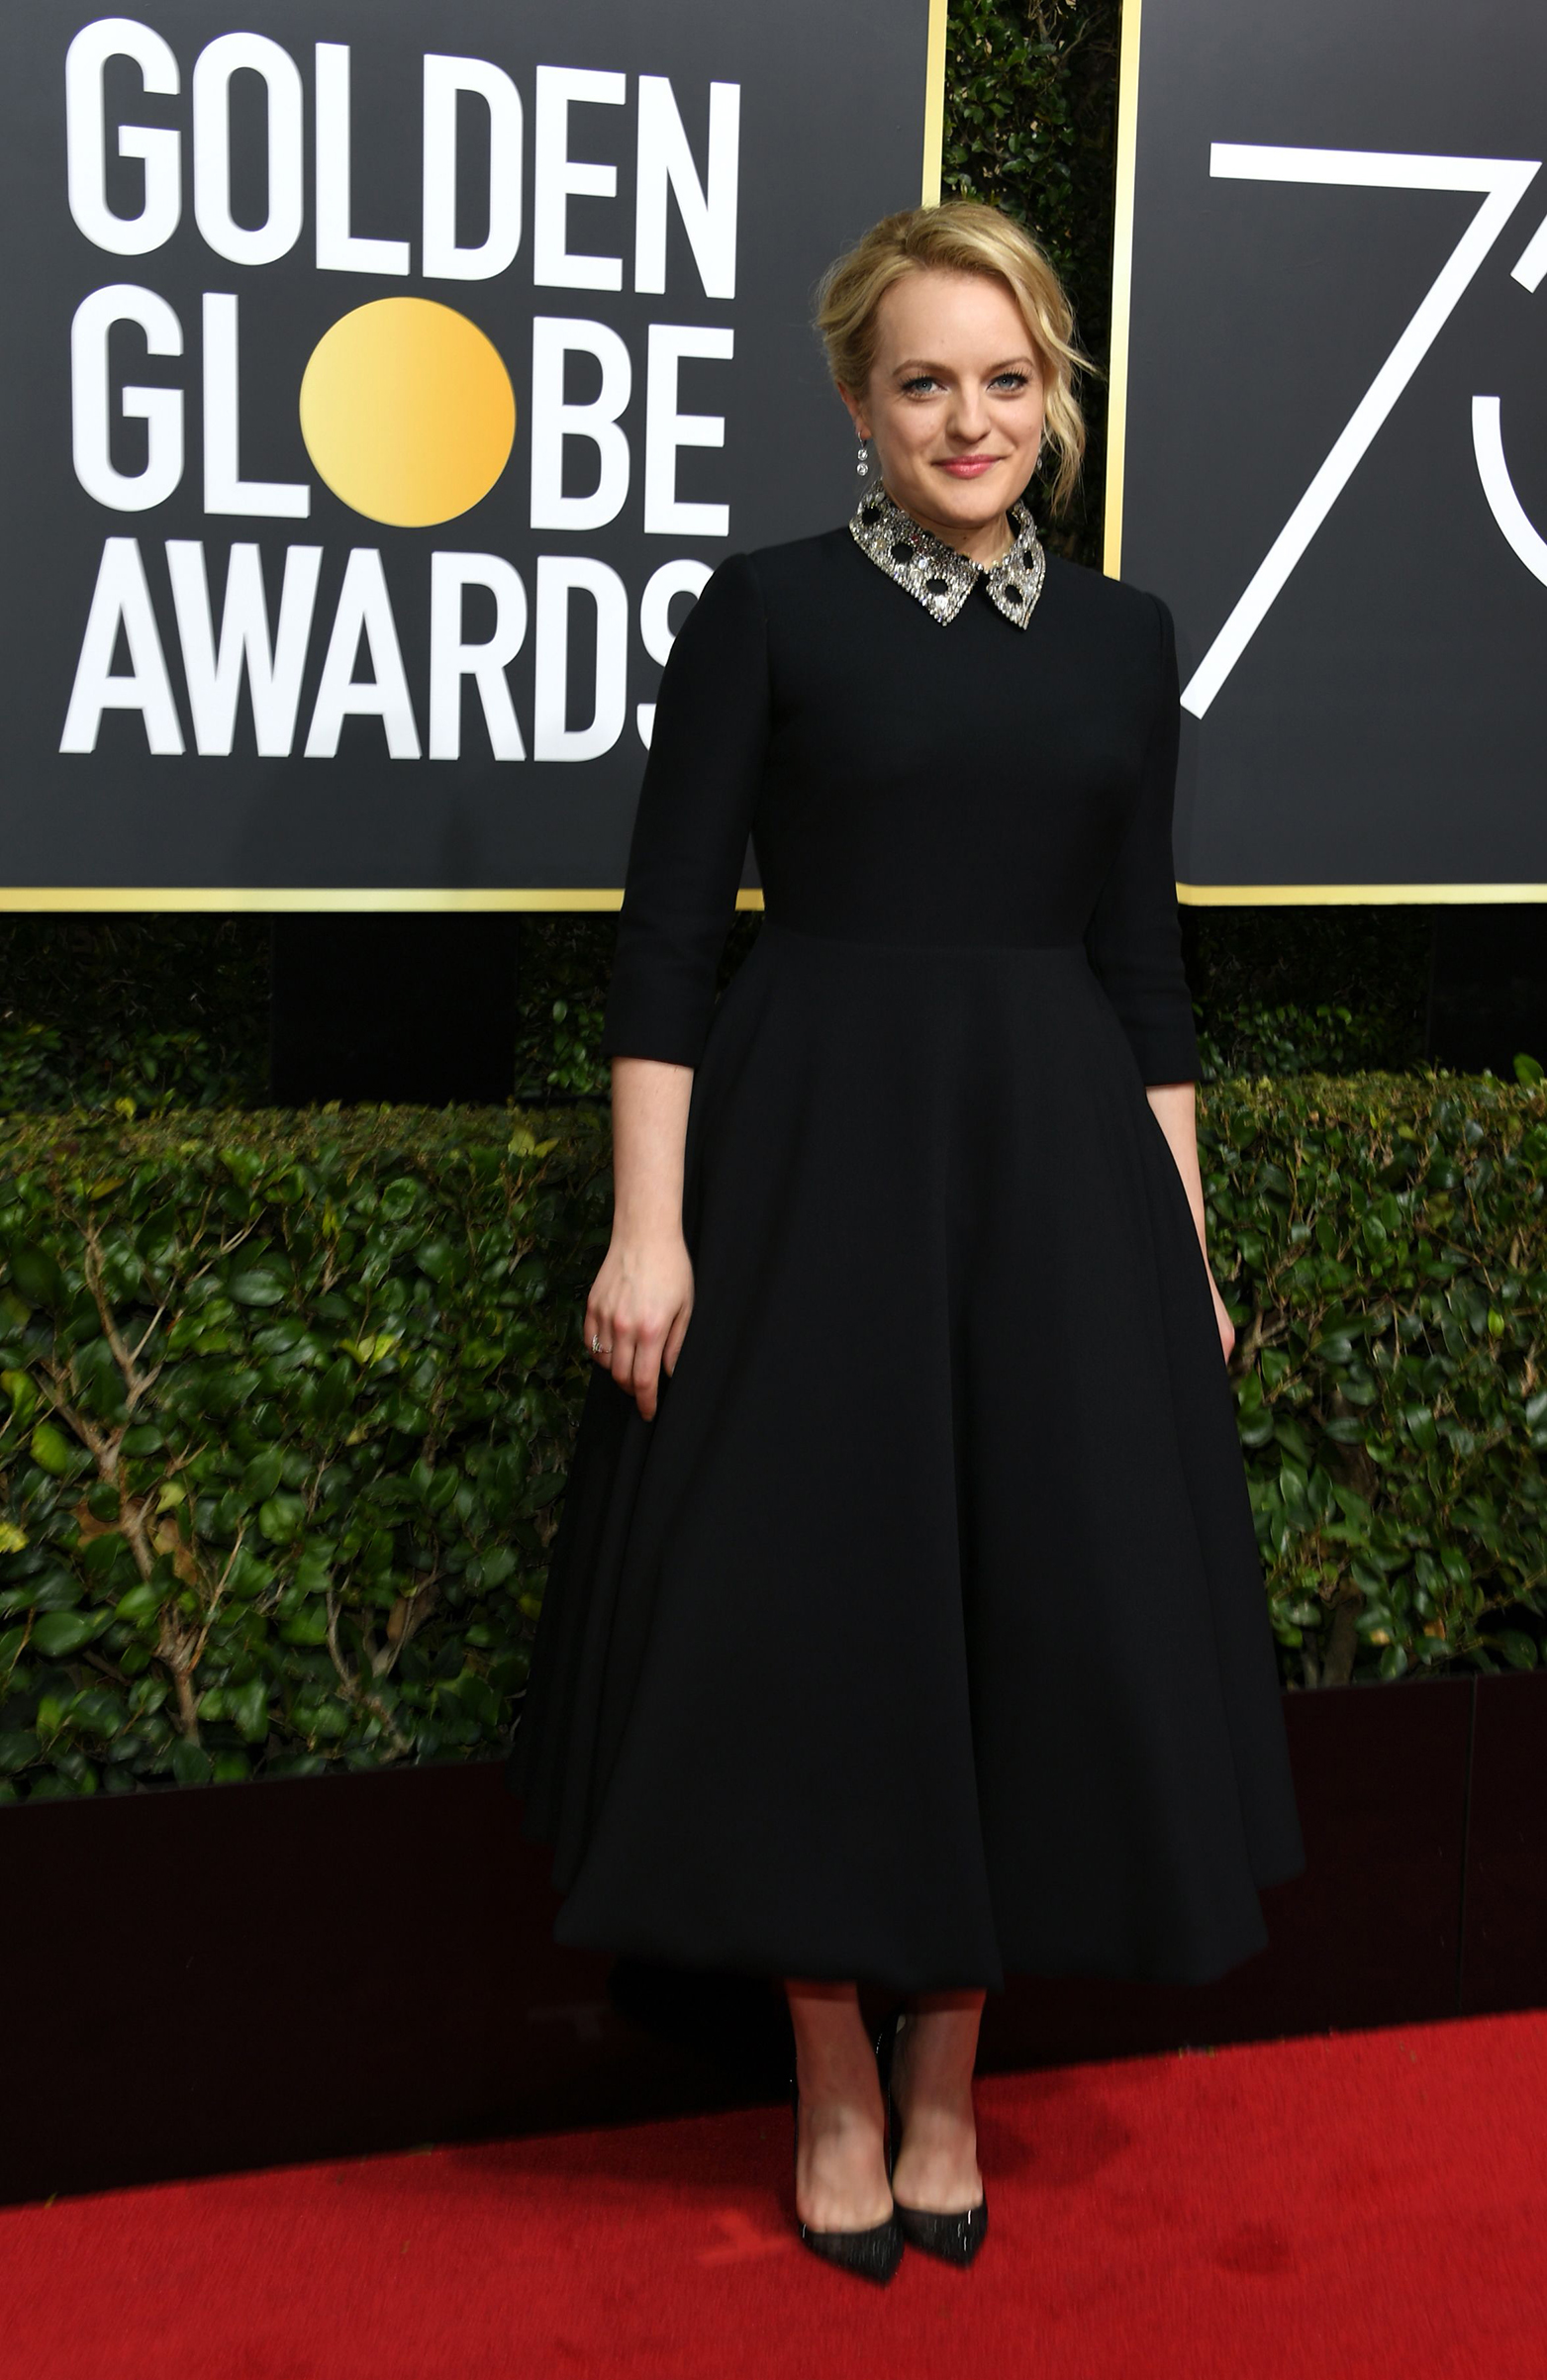 Actress Elisabeth Moss arrives for the 75th Golden Globe Awards on January 7, 2018, in Beverly Hills, California.